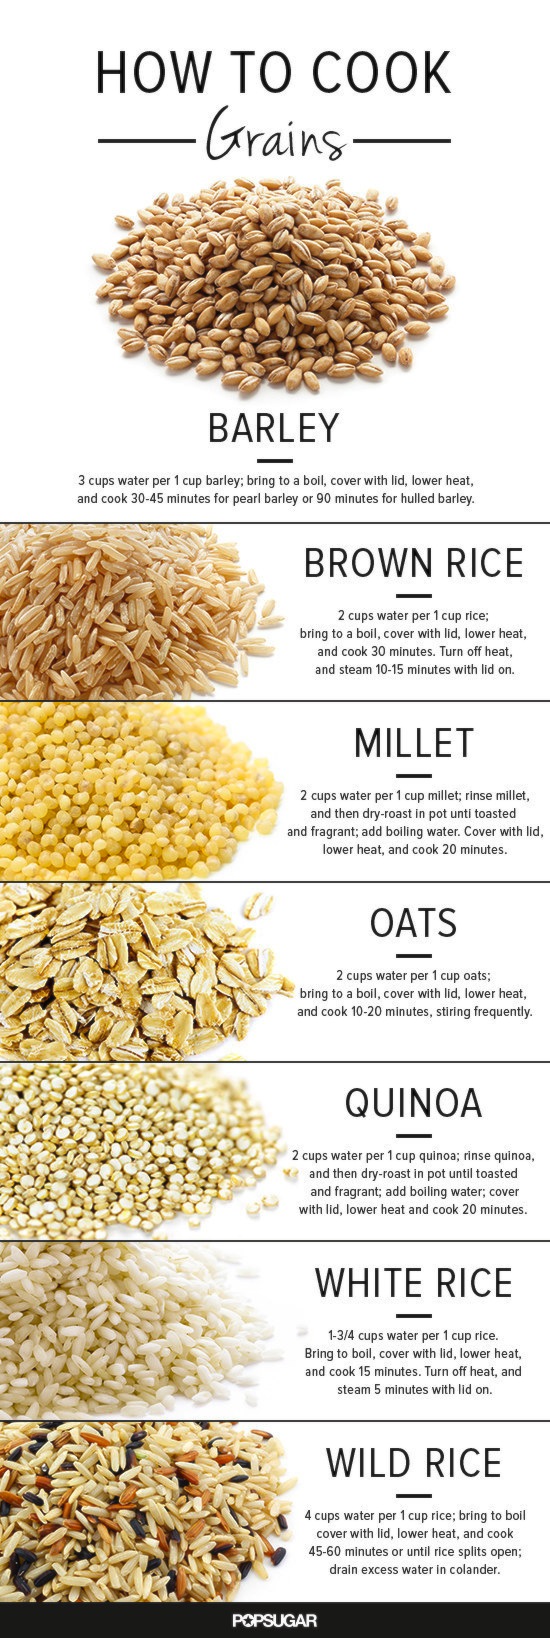 Your Guide To Cooking Grains The Right Way Infographic